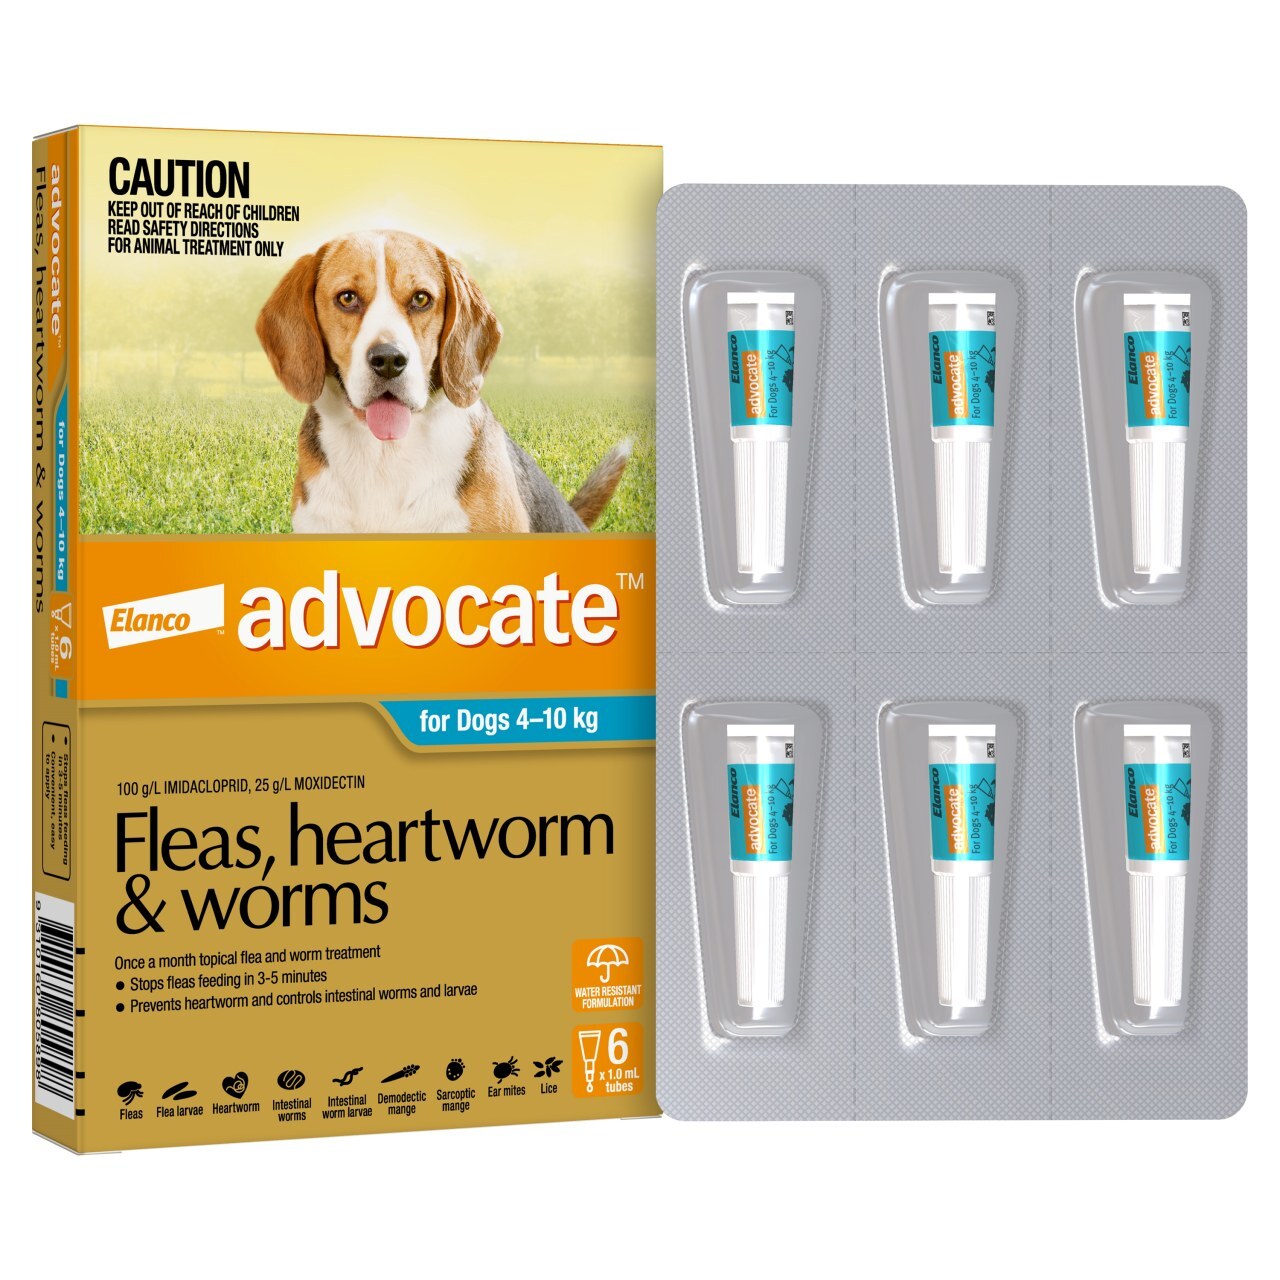 Advocate Spot-On Flea & Worm Control for Dogs 4-10kg - 6-pack image 2